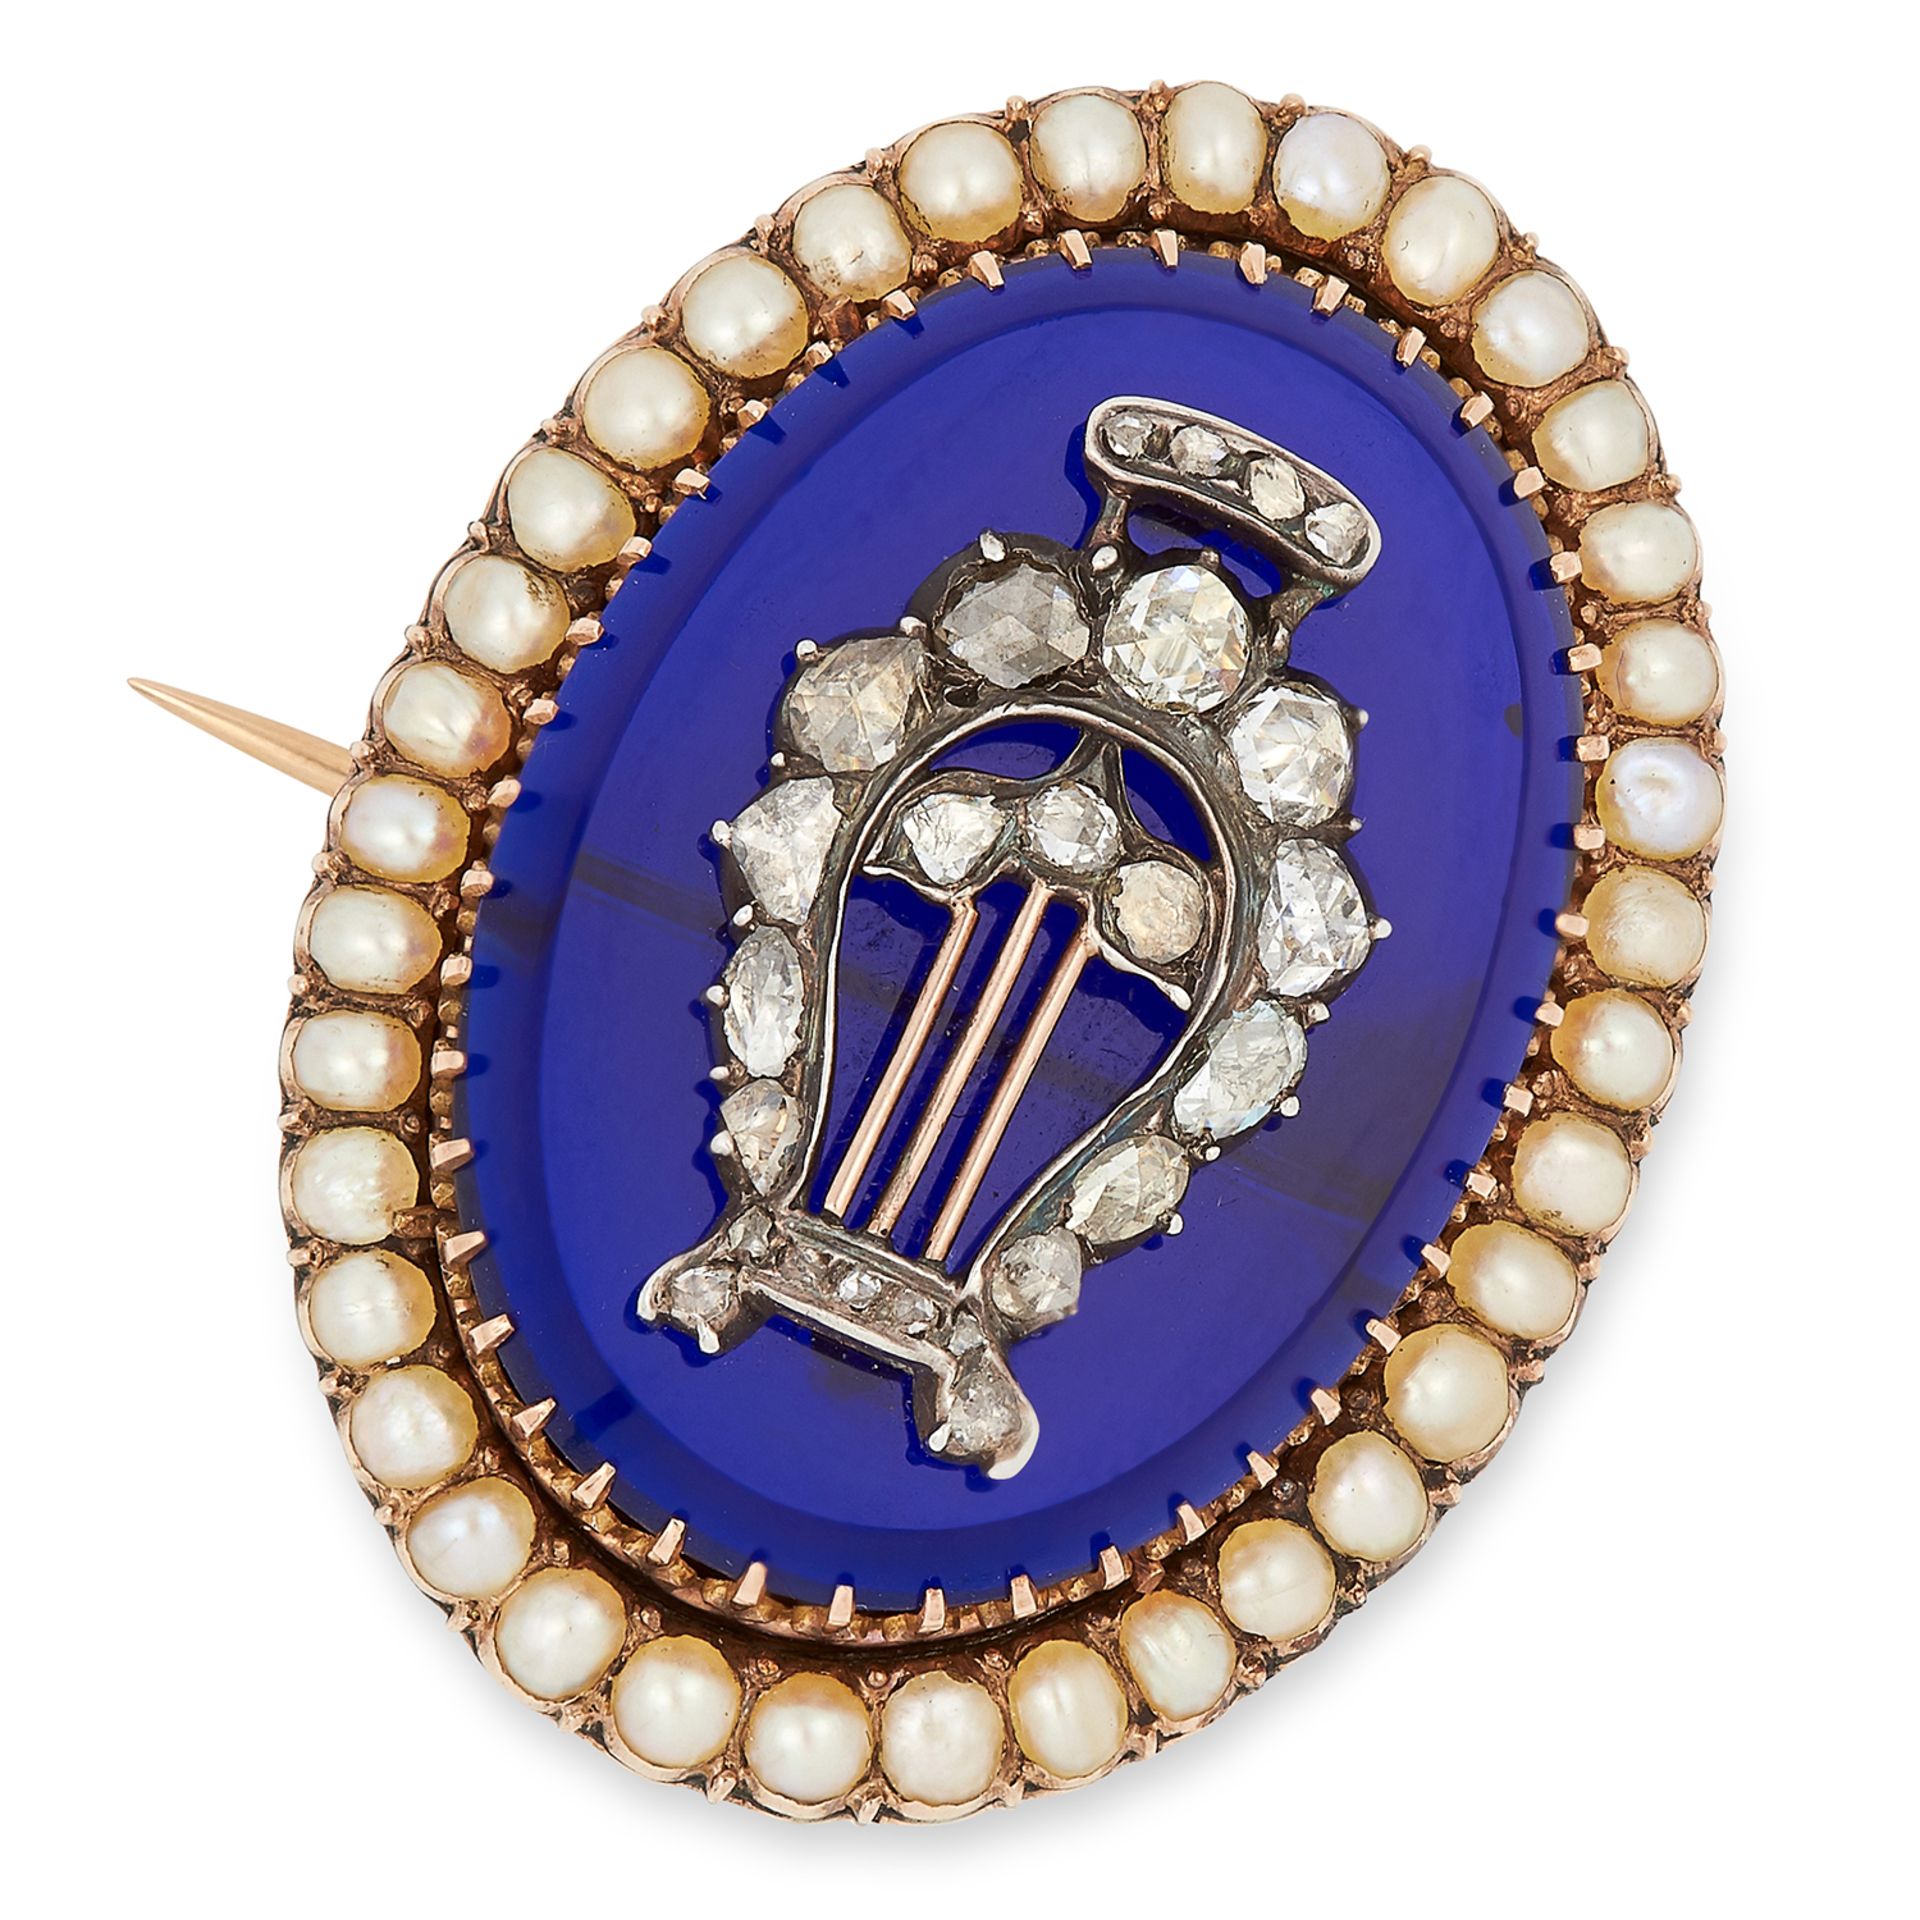 ANTIQUE VICTORIAN PEARL, DIAMOND AND BLUE HARDSTONE BROOCH set with rose cut diamonds in harp